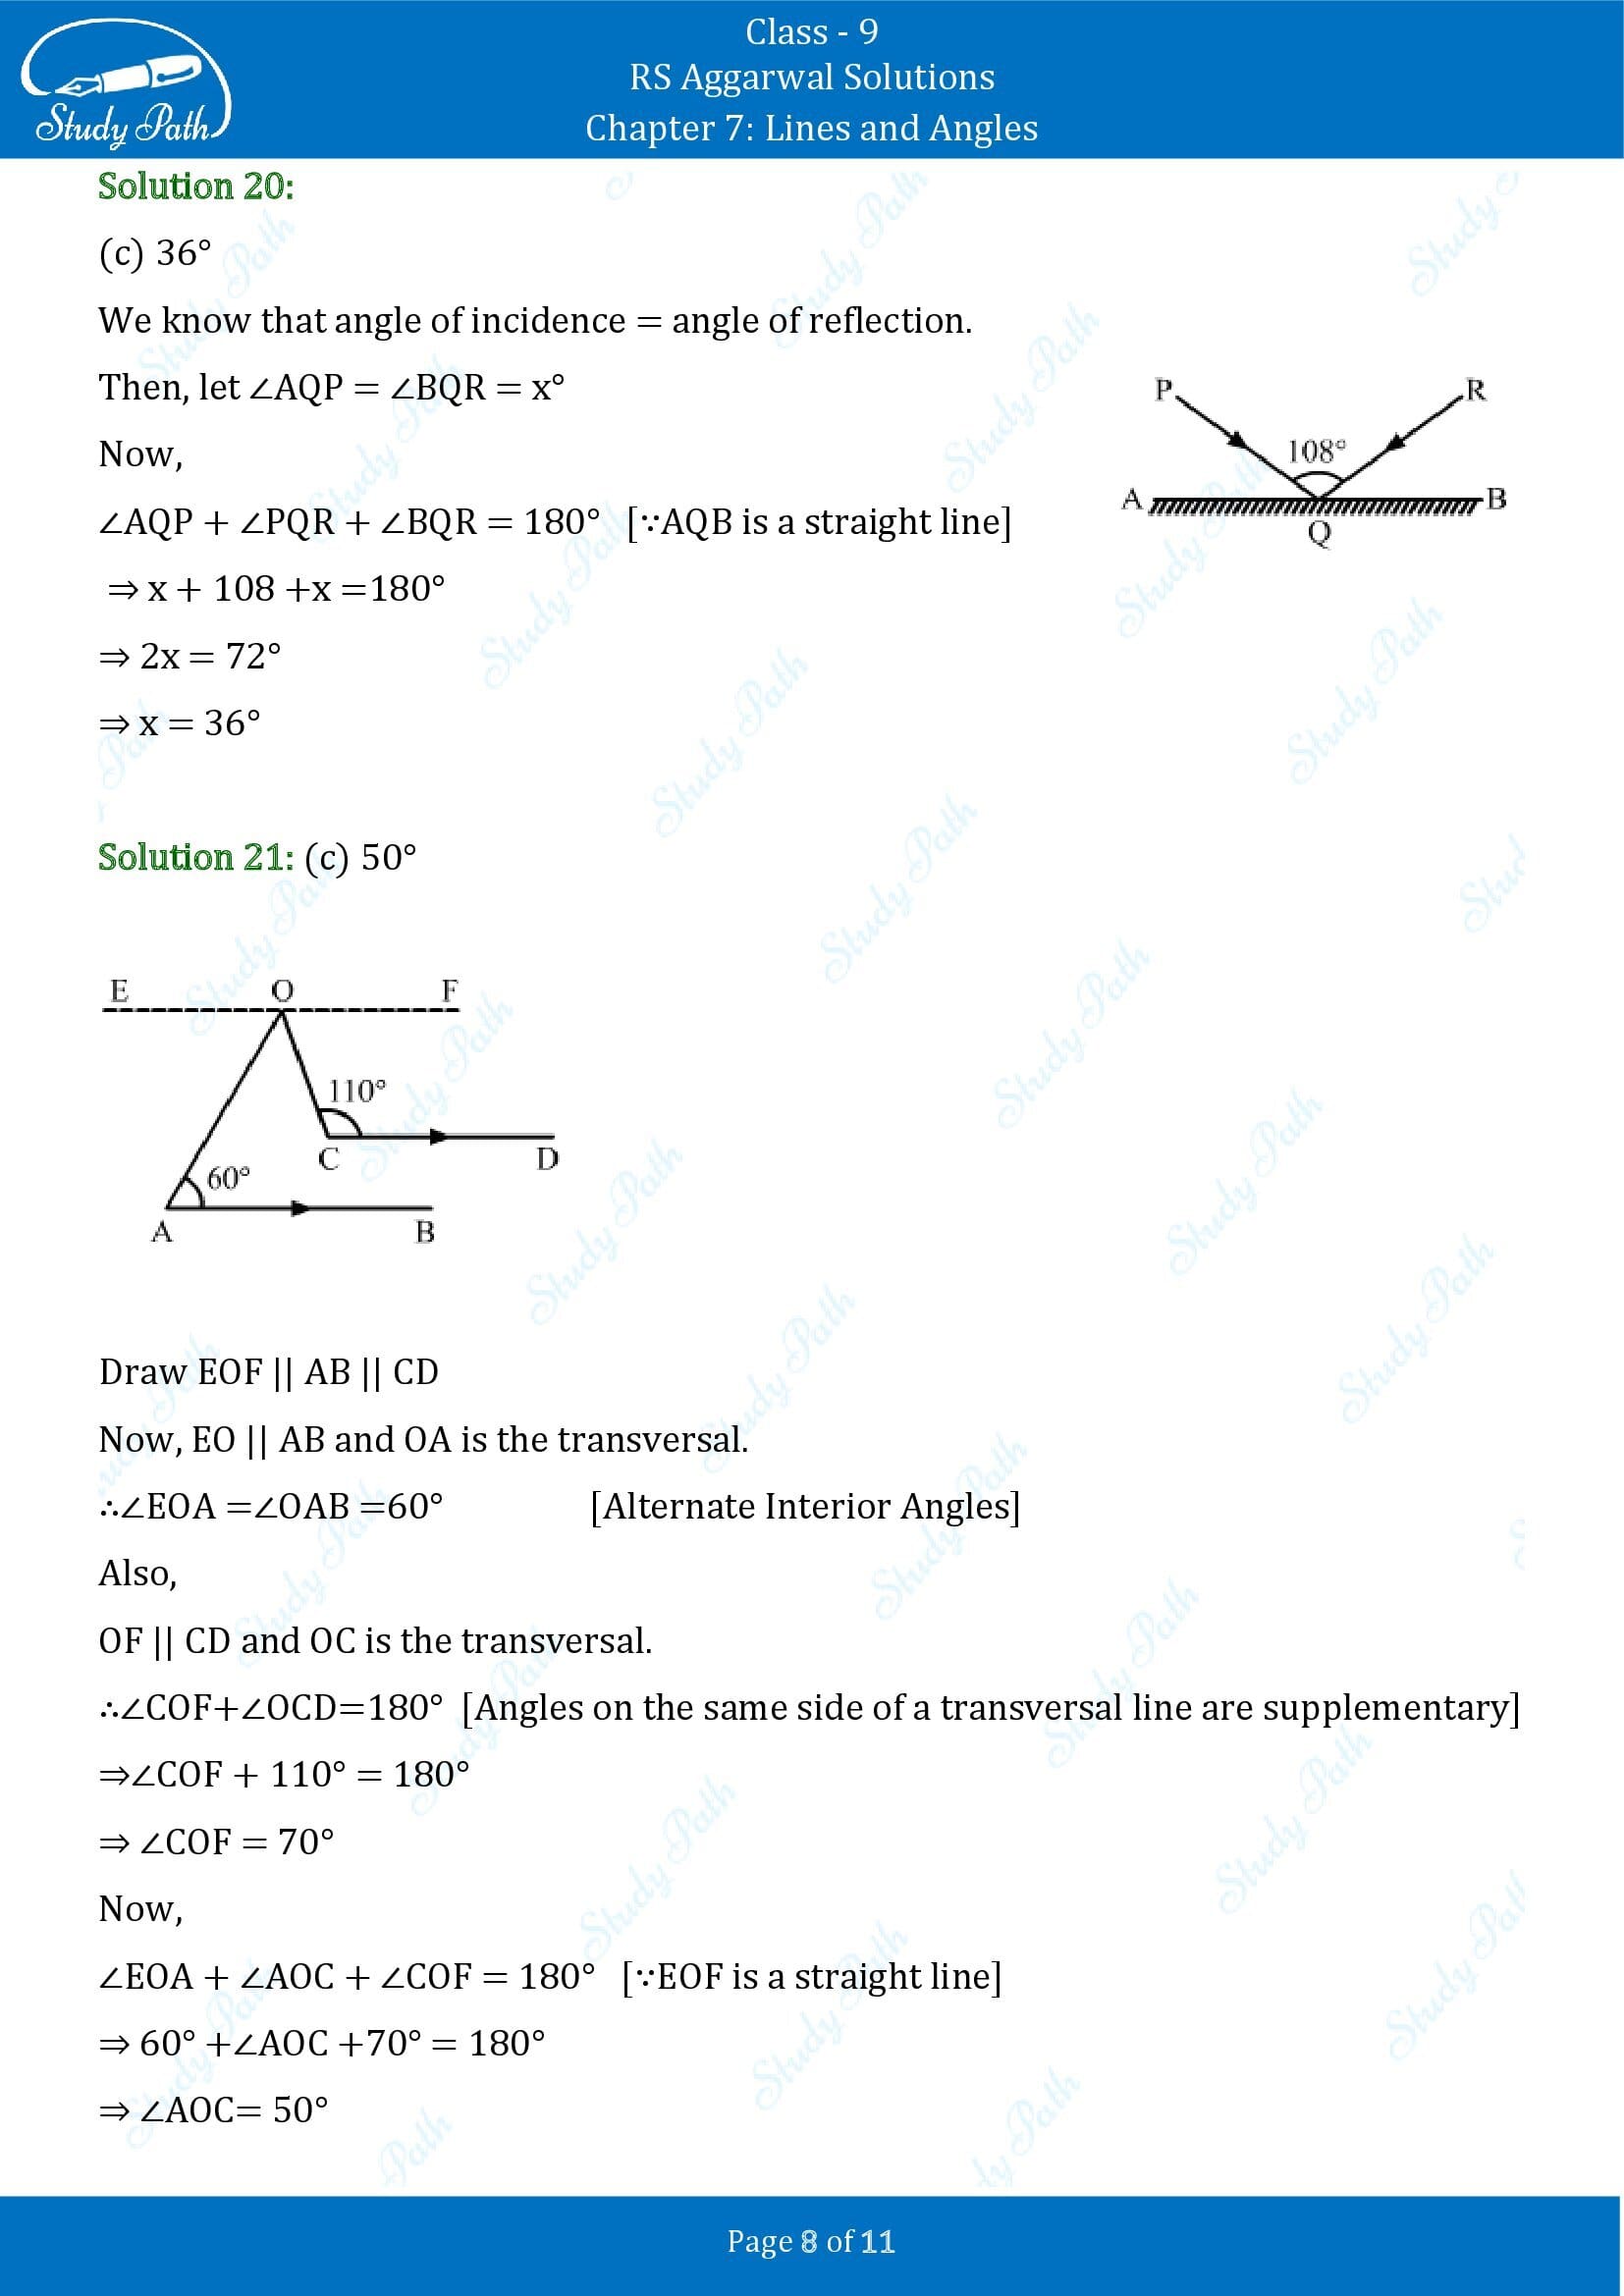 RS Aggarwal Solutions Class 9 Chapter 7 Lines and Angles Multiple Choice Questions MCQs 00008